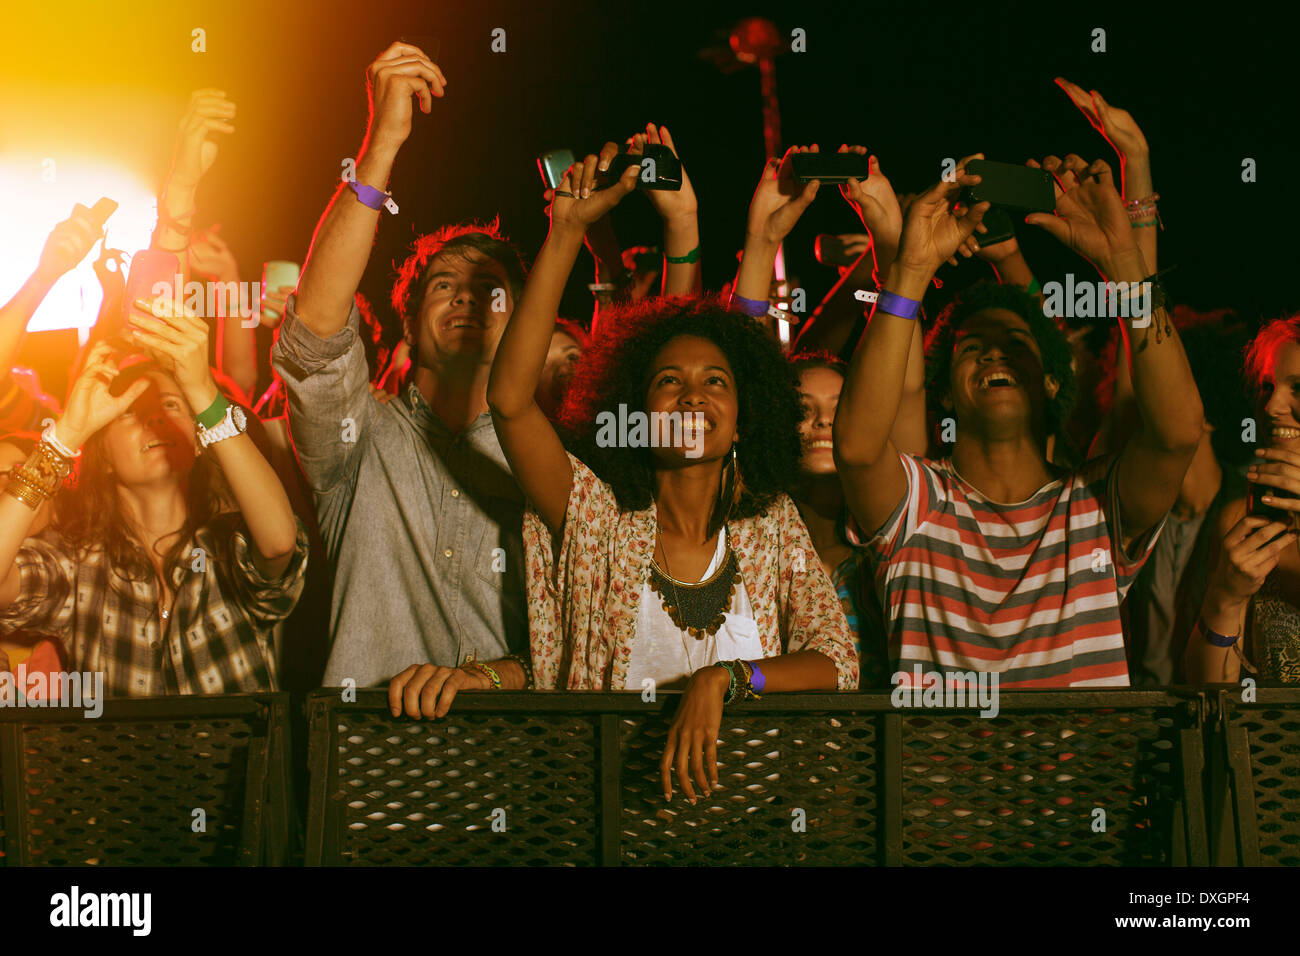 Fans with camera phones cheering at music festival Stock Photo